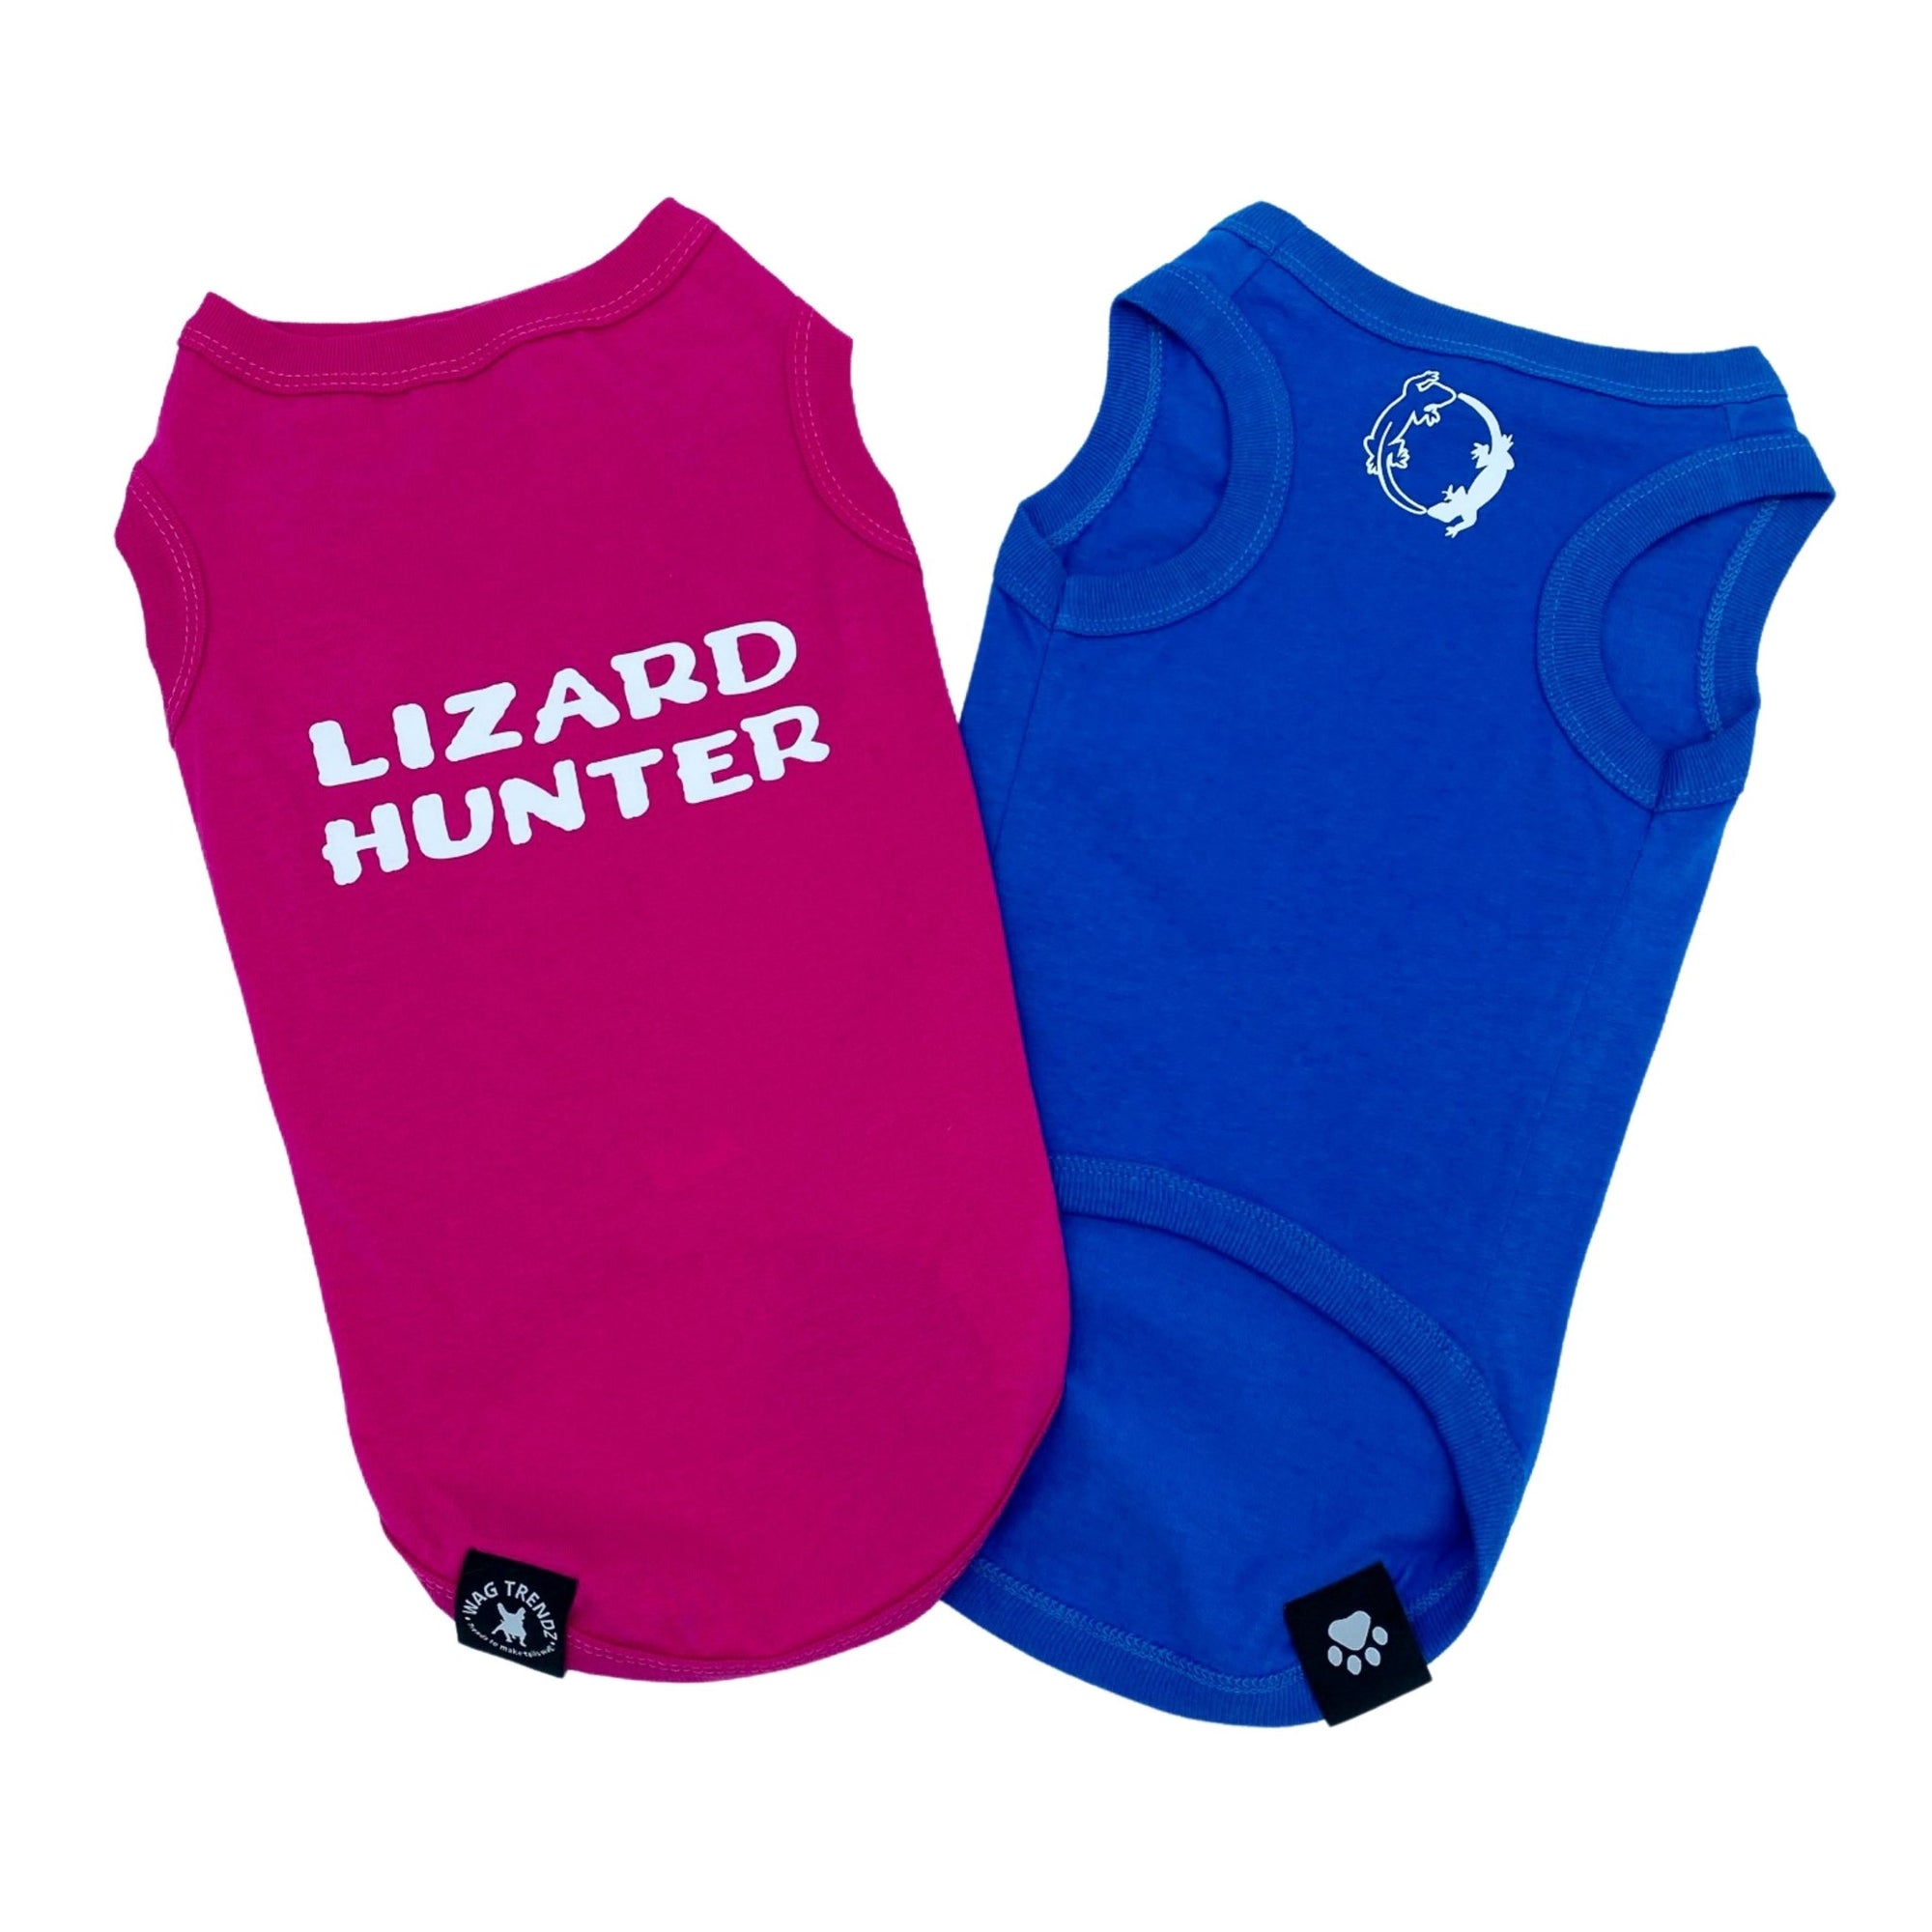 Dog T-Shirt - &quot;Lizard Hunter&quot; -  Hot Pink and Royal Blue dog t-shirts - back view with Lizard Hunter lettering in white and chest view with lizards making a circle emoji - against solid white background - Wag Trendz